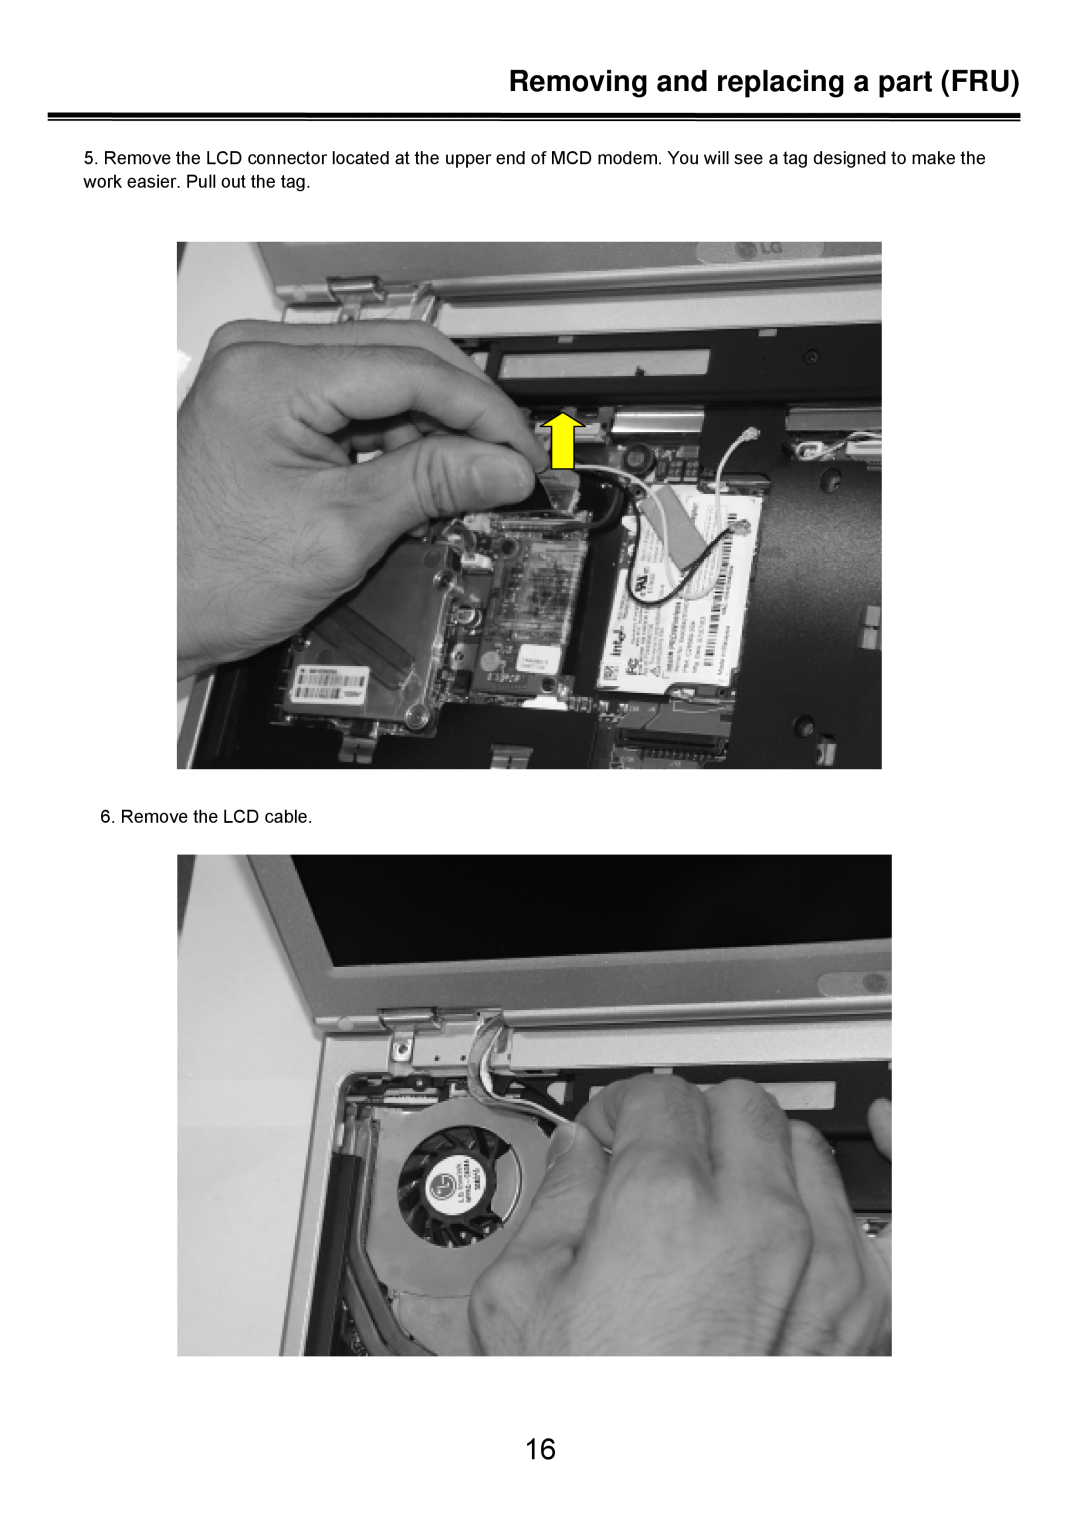 LG Electronics LS50 service manual Remove the LCD cable, Removing and replacing a part FRU 